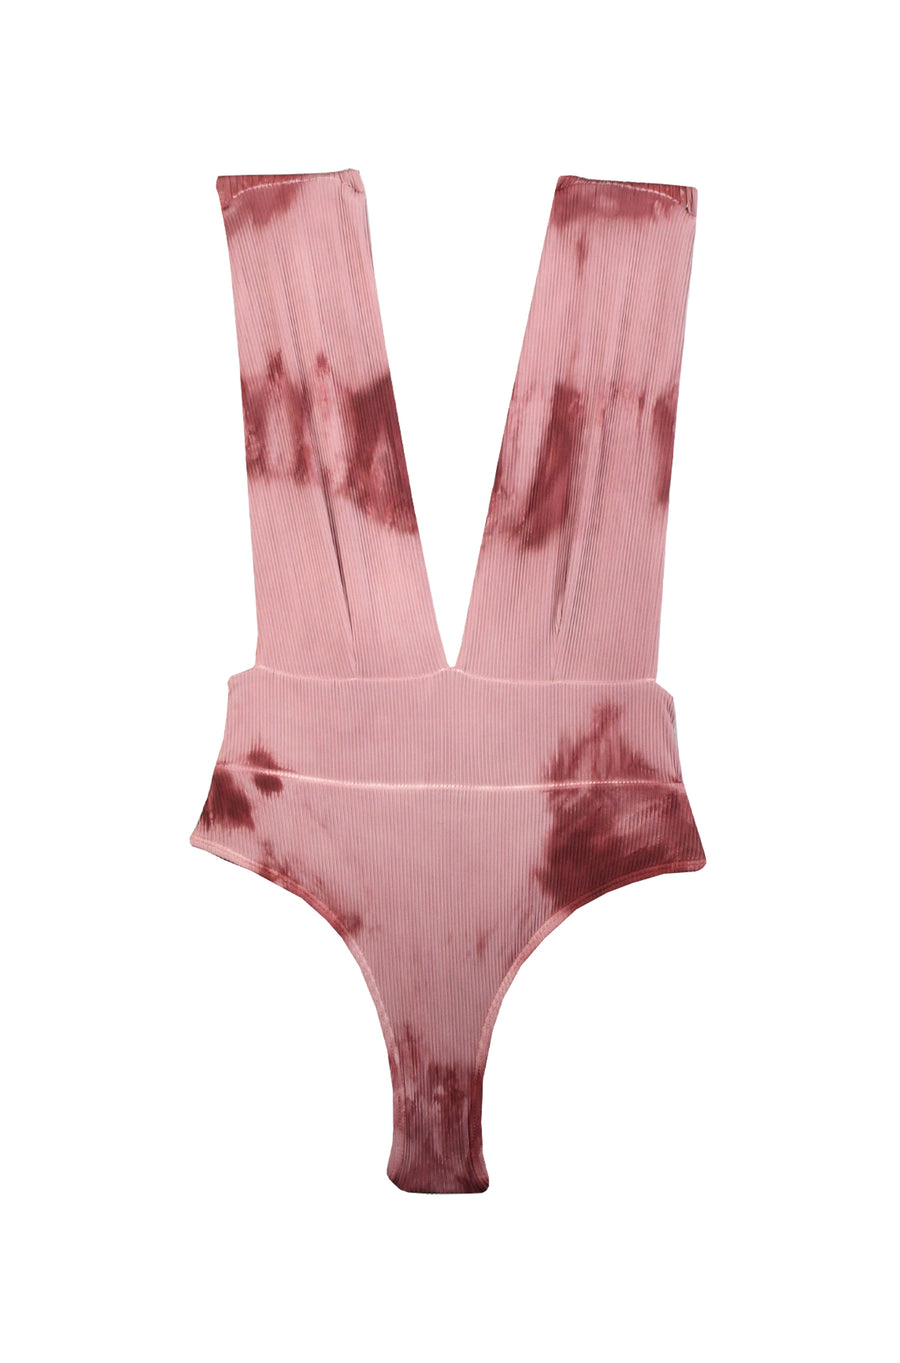 Ribbed one piece hand-dyed in mauve tones.